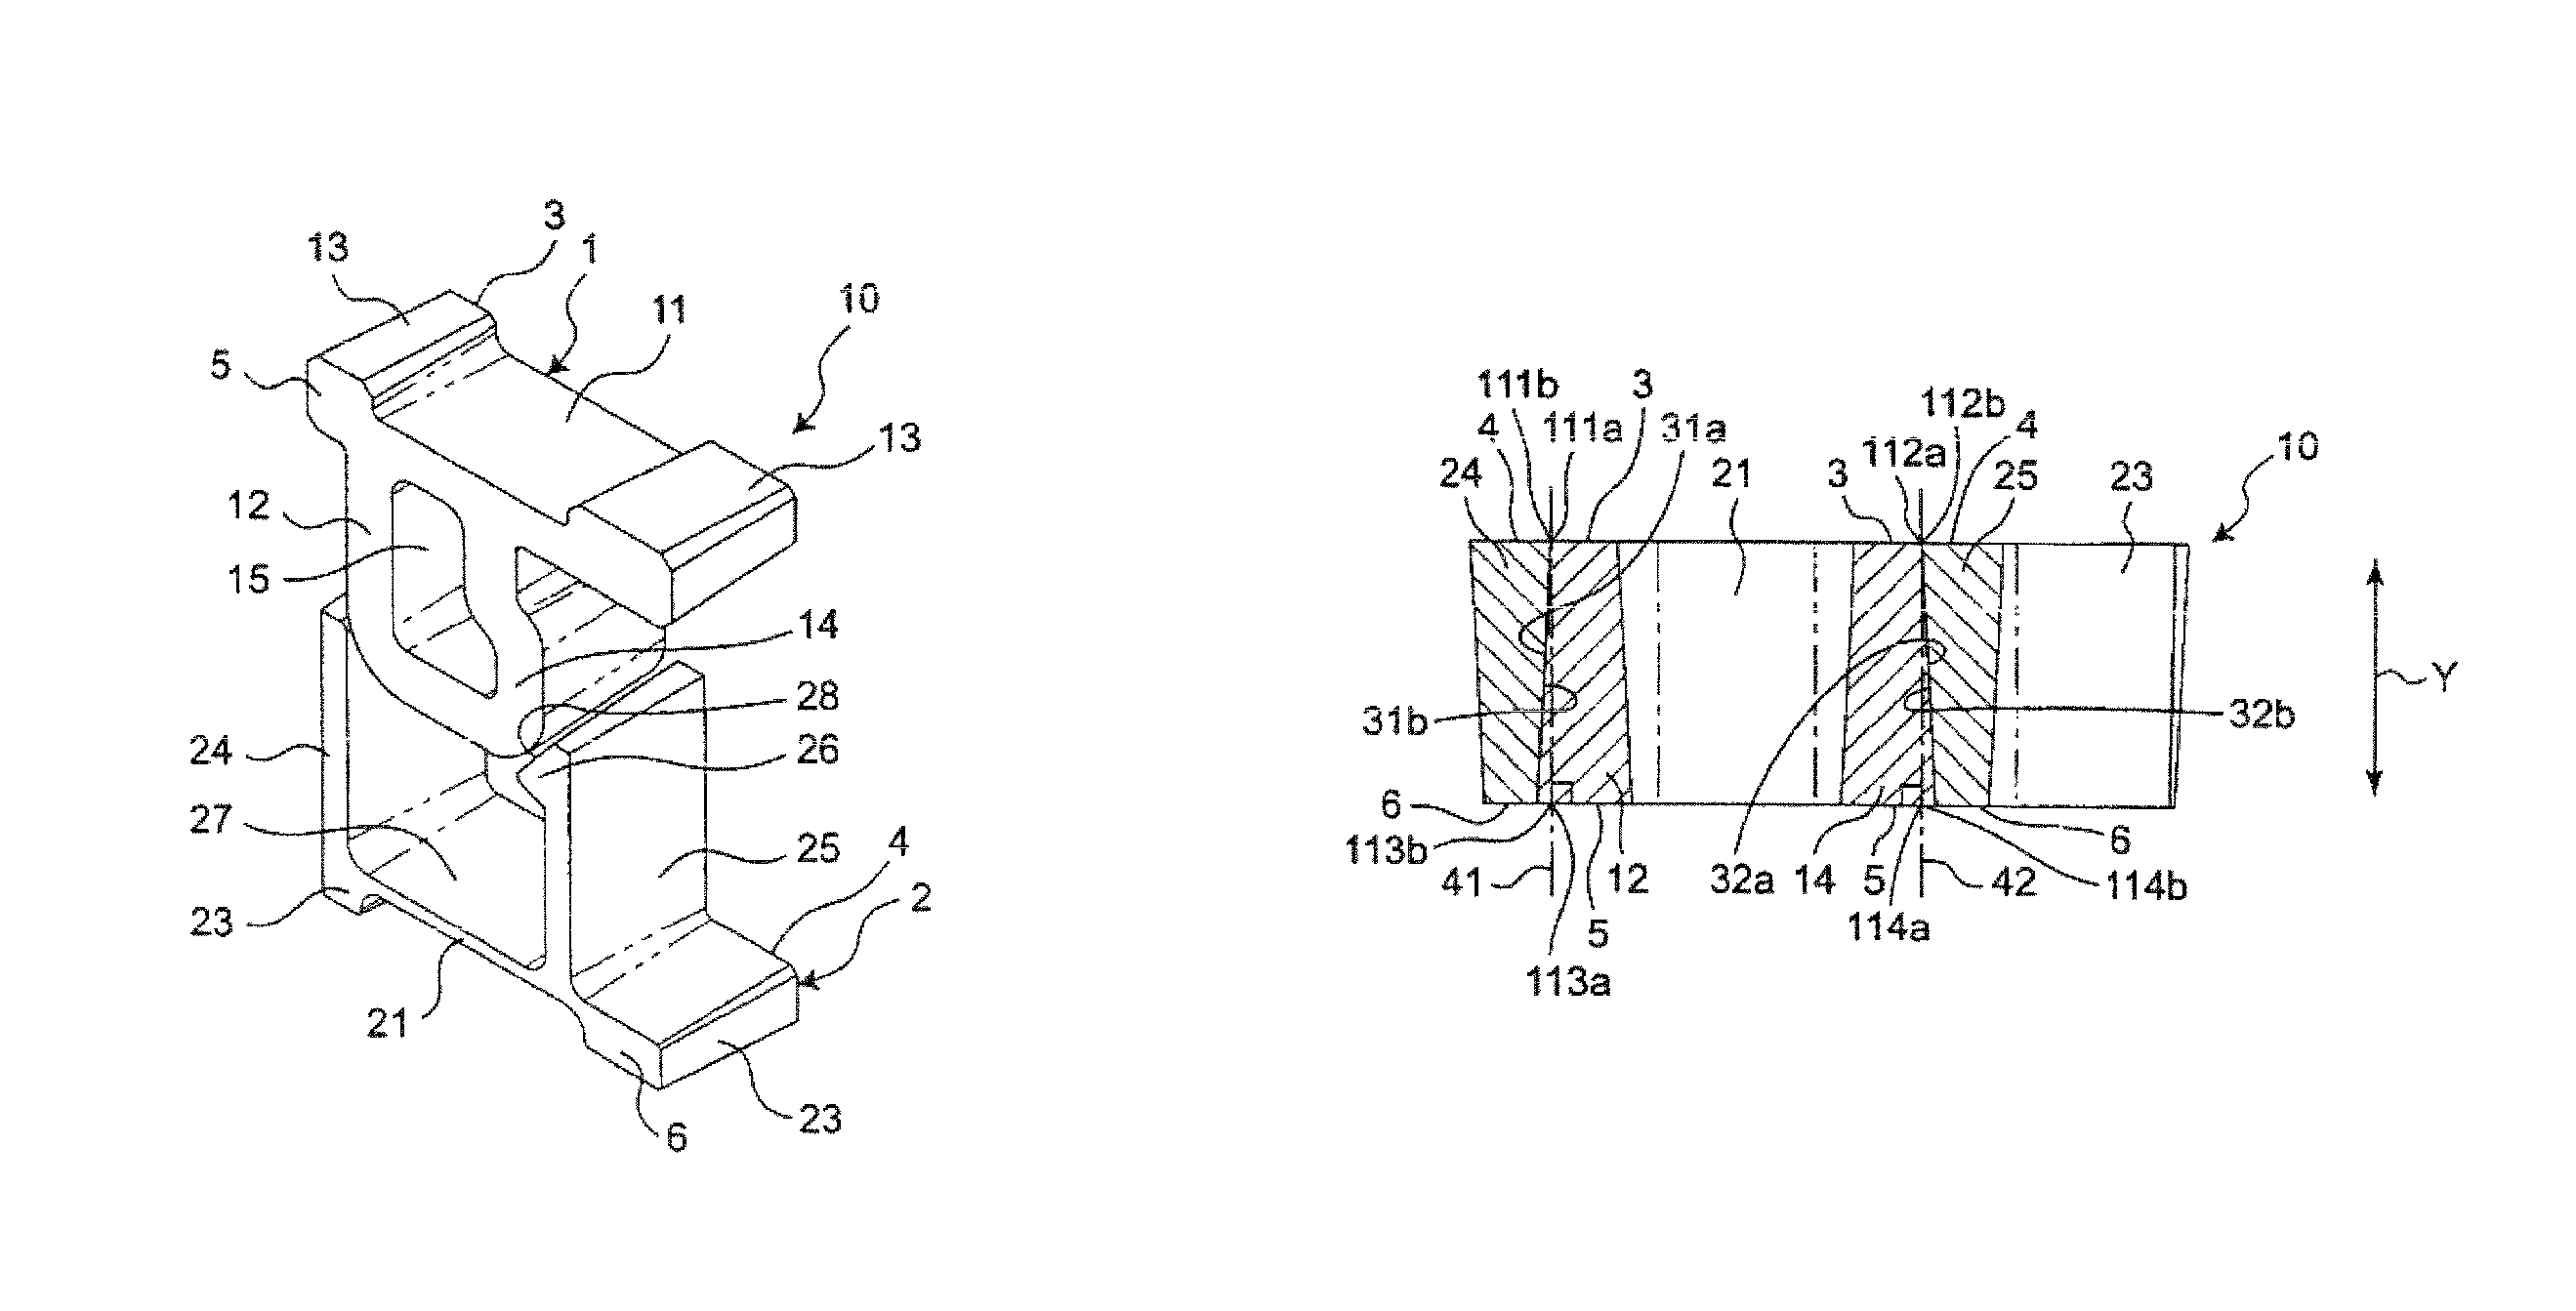 Connecting mechanism having two contacts with contact surfaces inclined in a direction perpendicular to their mating direction